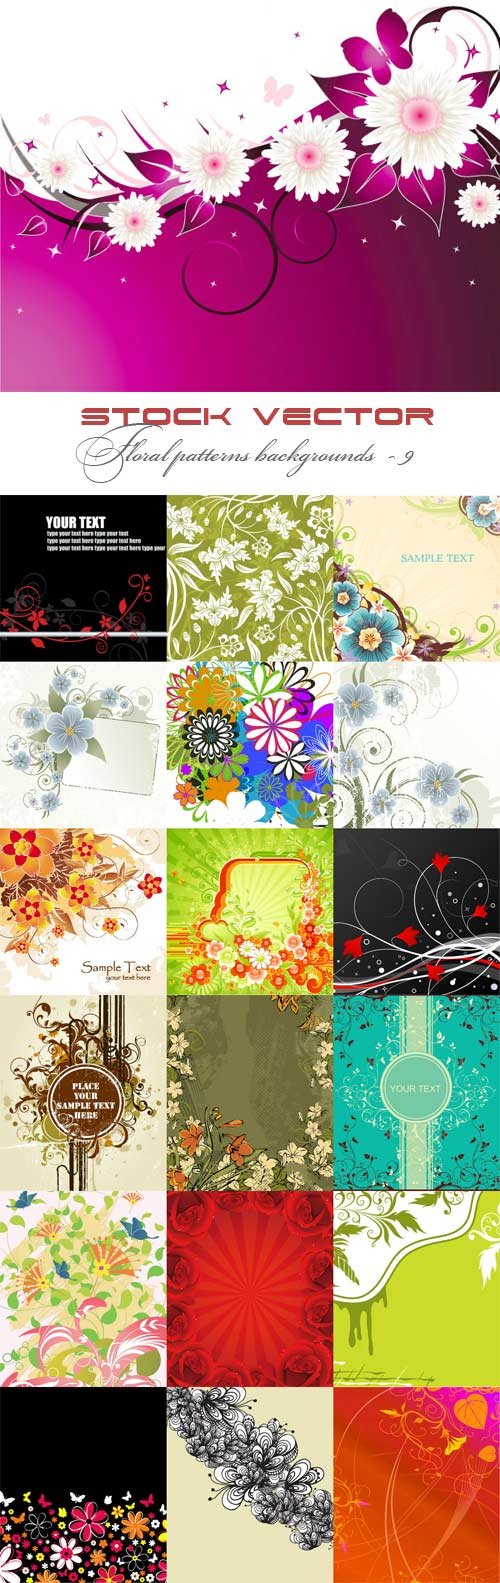 Floral patterns backgrounds stock vector - 9